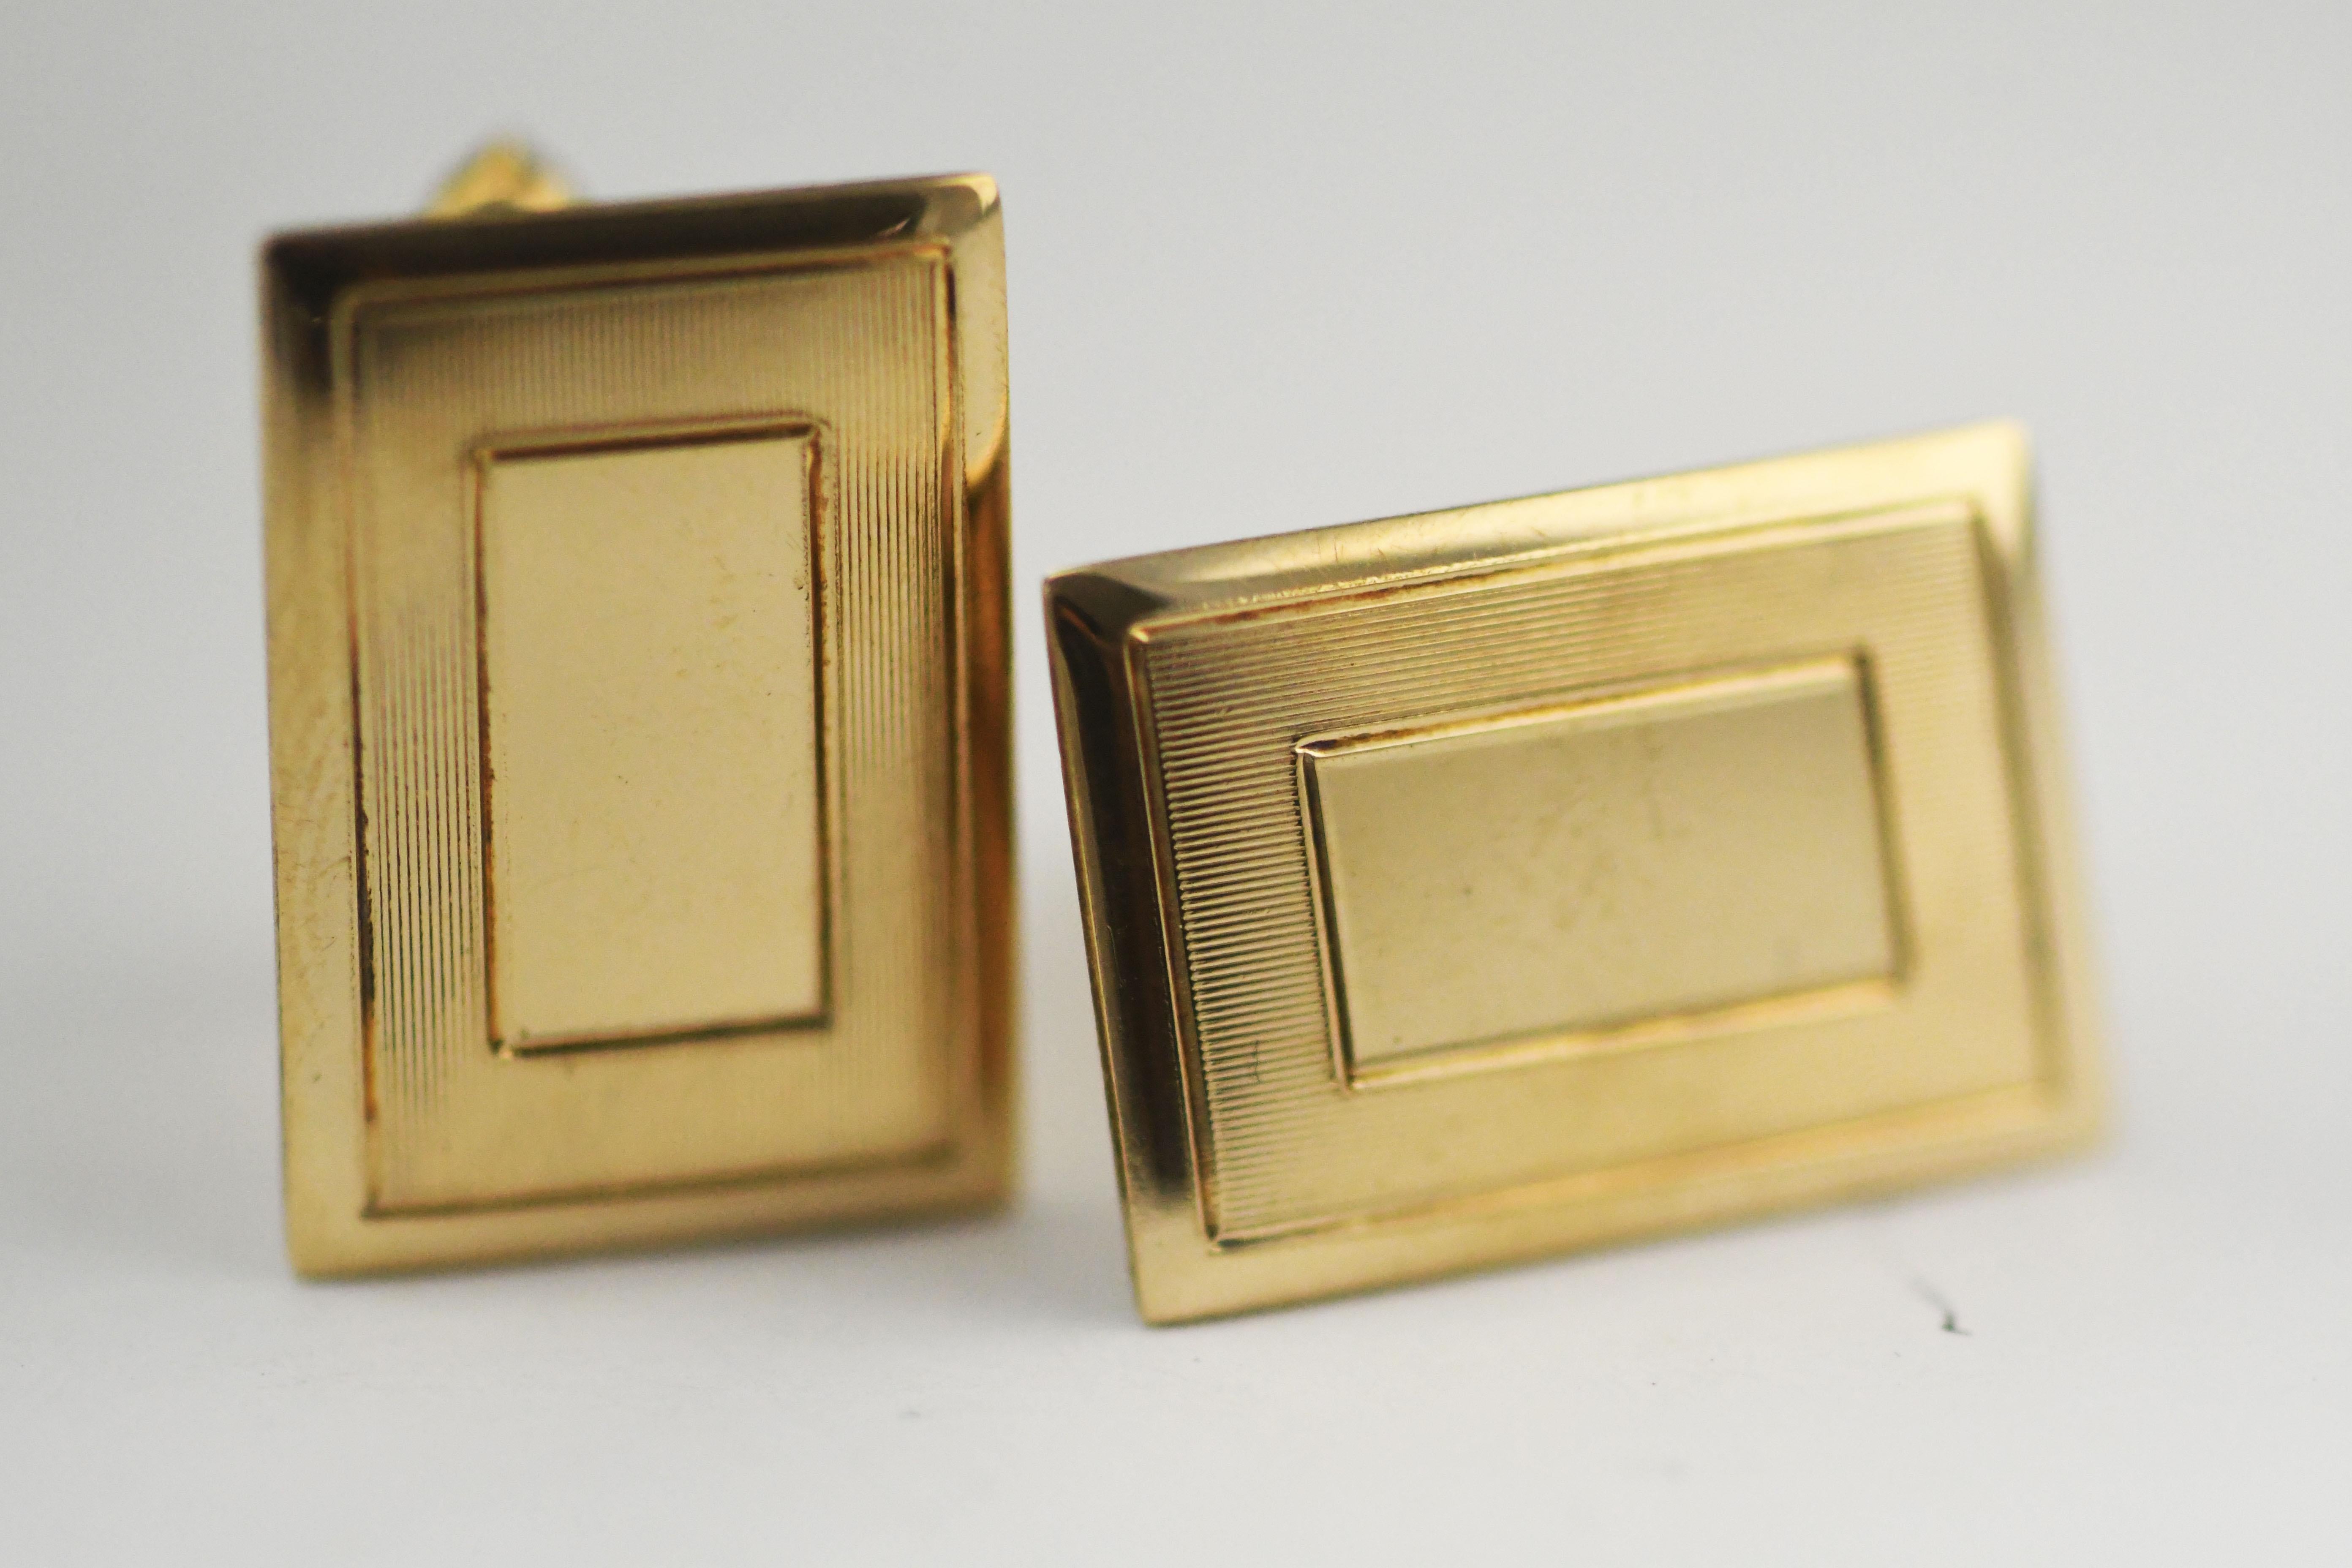 Classic La Mode 10k Yellow Gold Rectangle Mens Cufflinks 8.2 grams Pieces are ready to be monogrammed. Beautiful and well built pieces.  21mm wide and 15mm tall.  They are 1